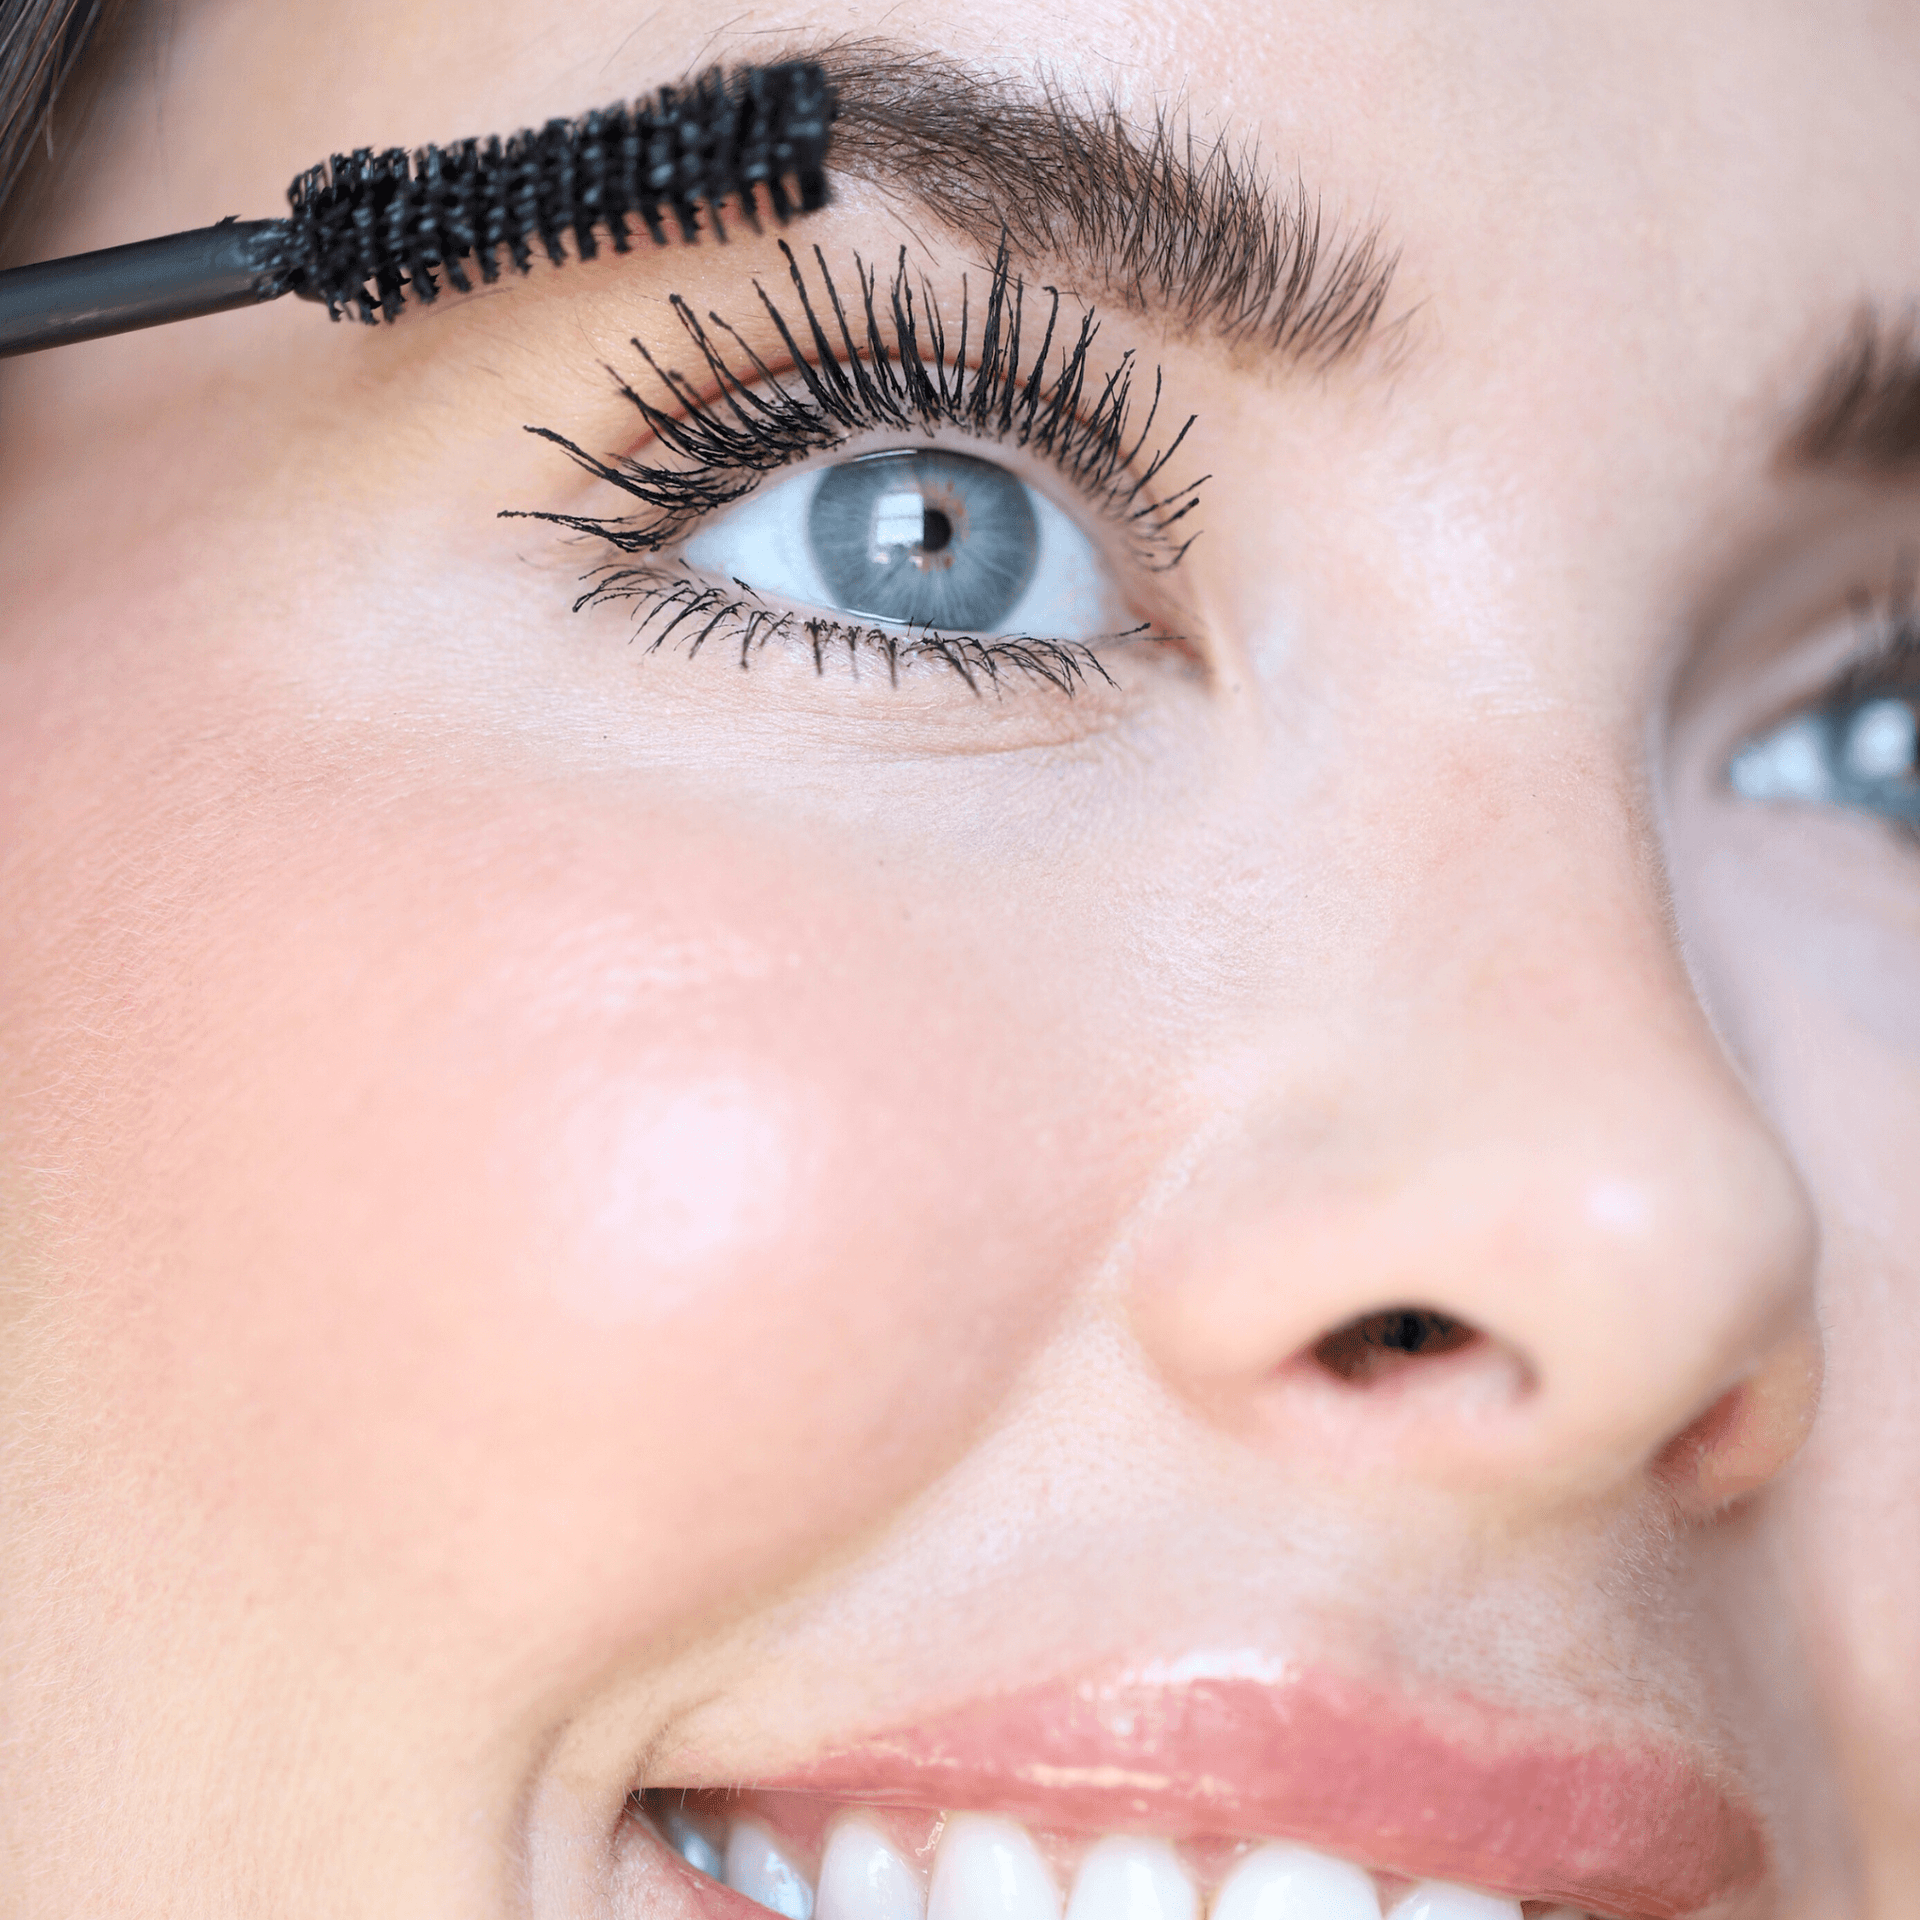 Close-up of a smiling person applying Eye Defy Zero Gravity Mascara to upper eyelashes, showcasing the mascara wand's hourglass shape and the product's clump-free, volumizing effect.